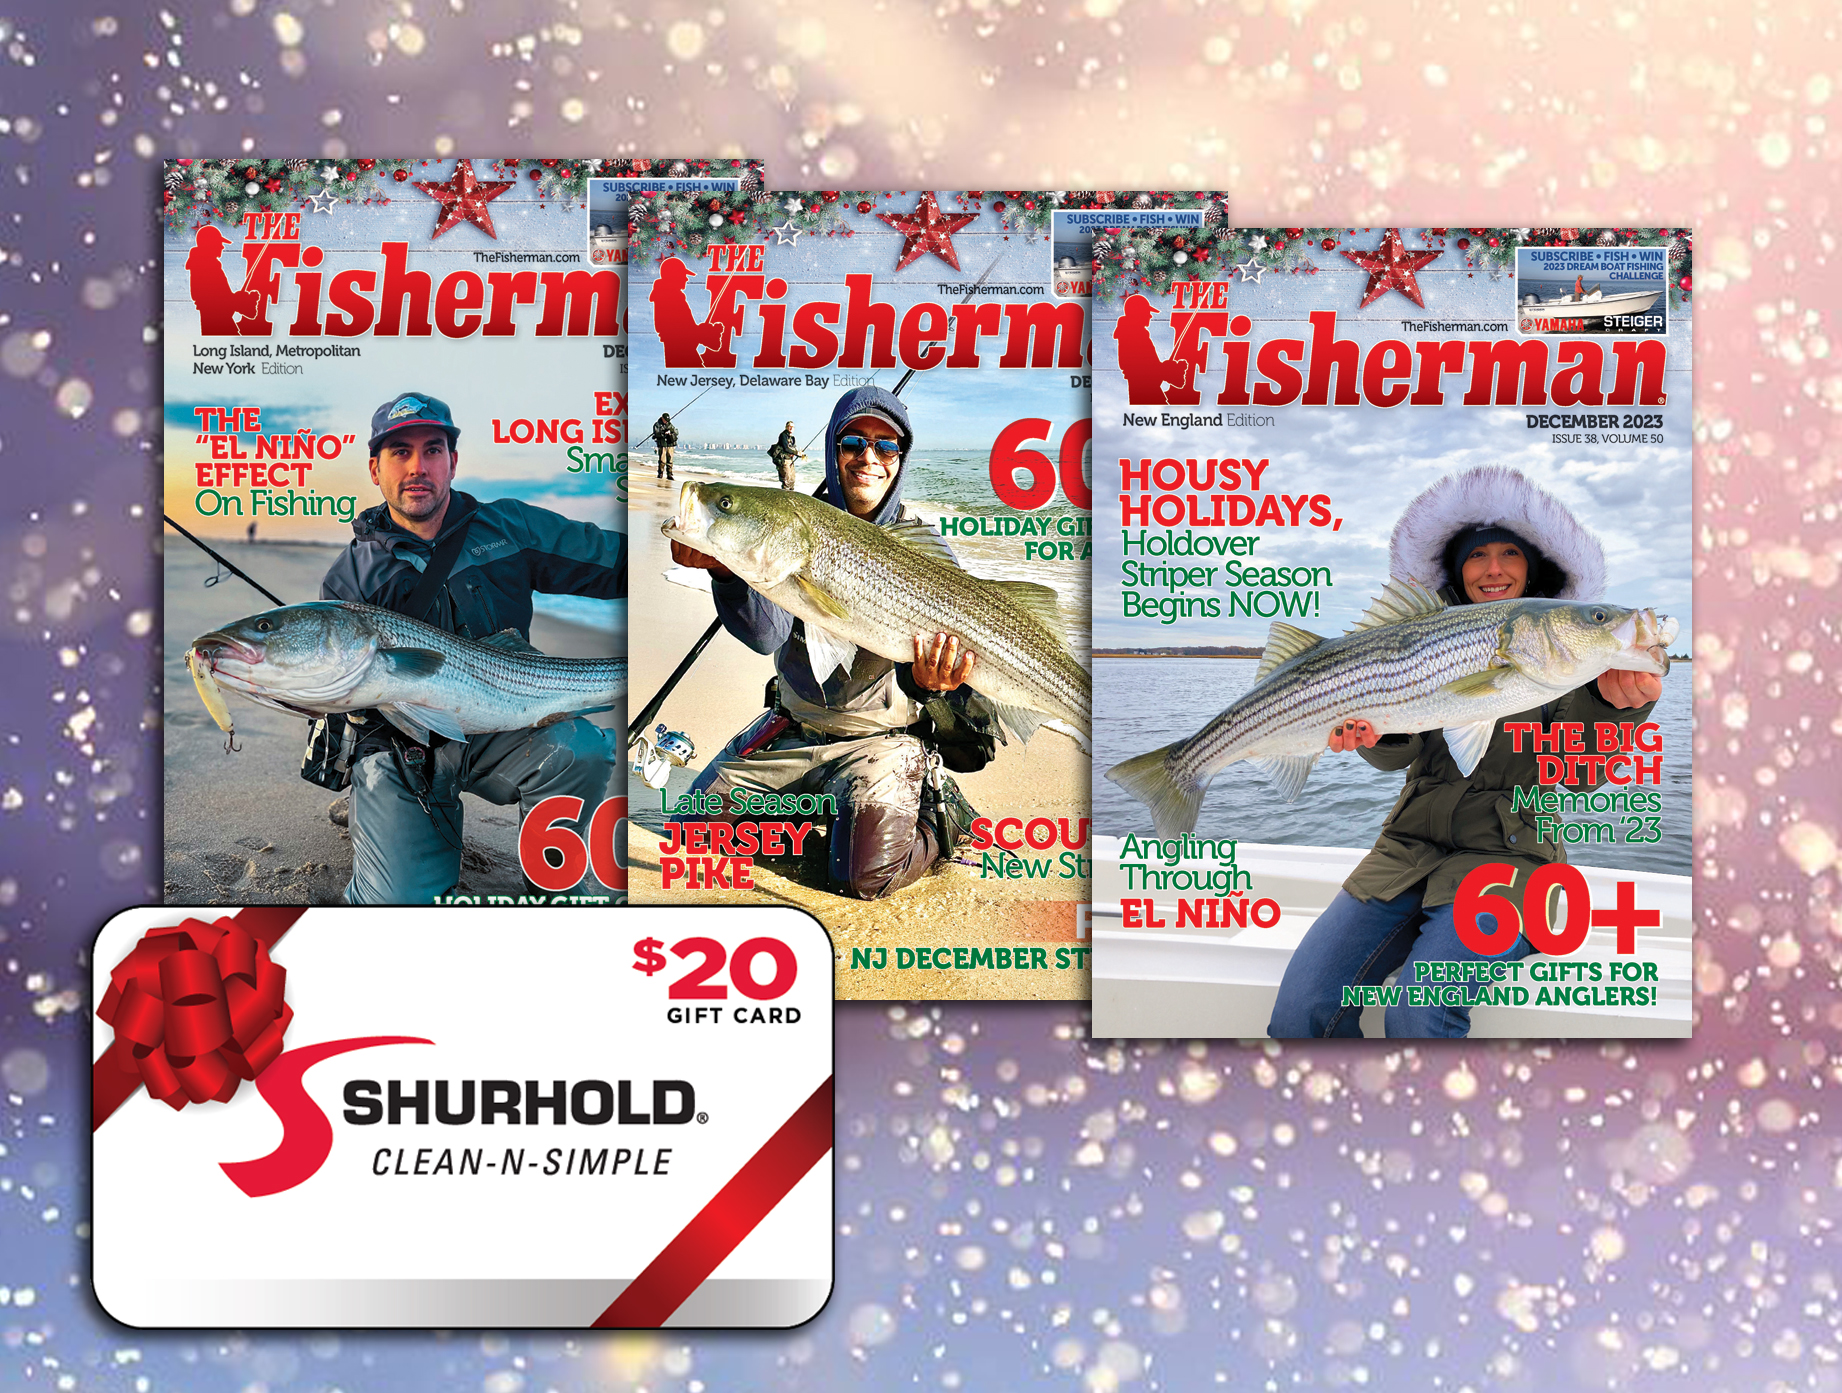 HOLIDAY LIFESAVERS: GIFT SUBSCRIPTIONS & MORE! - The Fisherman